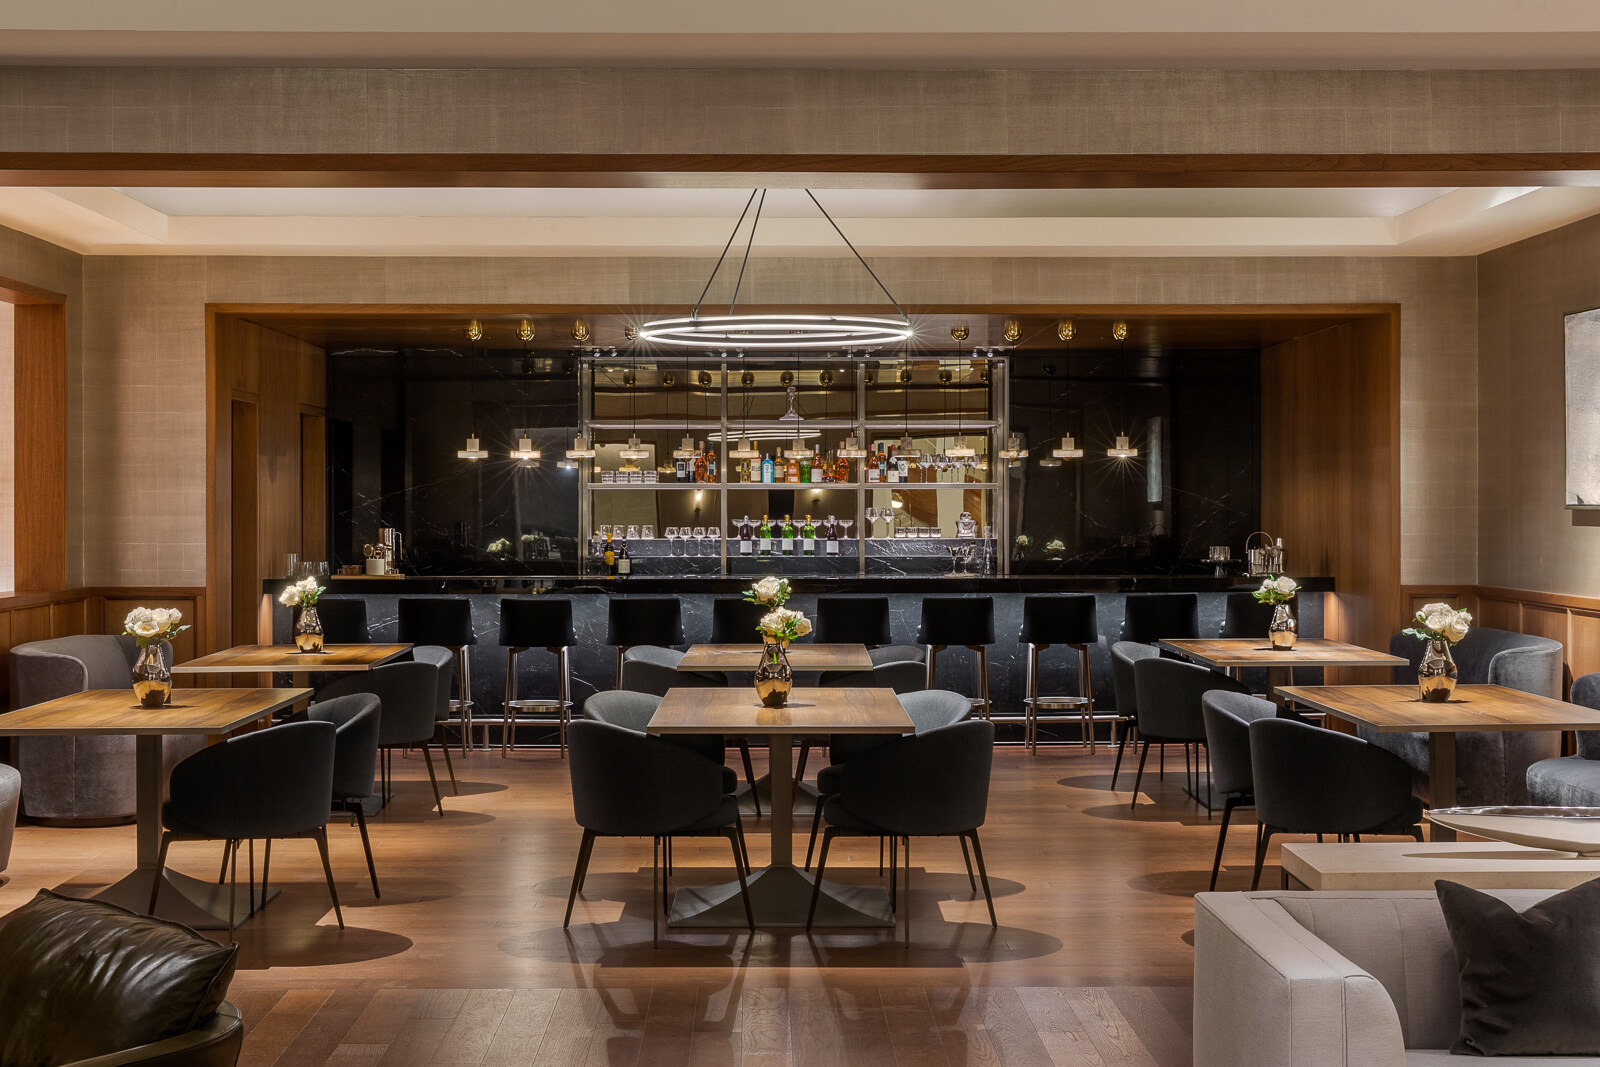 Elegant modern restaurant interior with dark wood tables, comfortable chairs, and a well-stocked bar illuminated by soft ambient lighting.